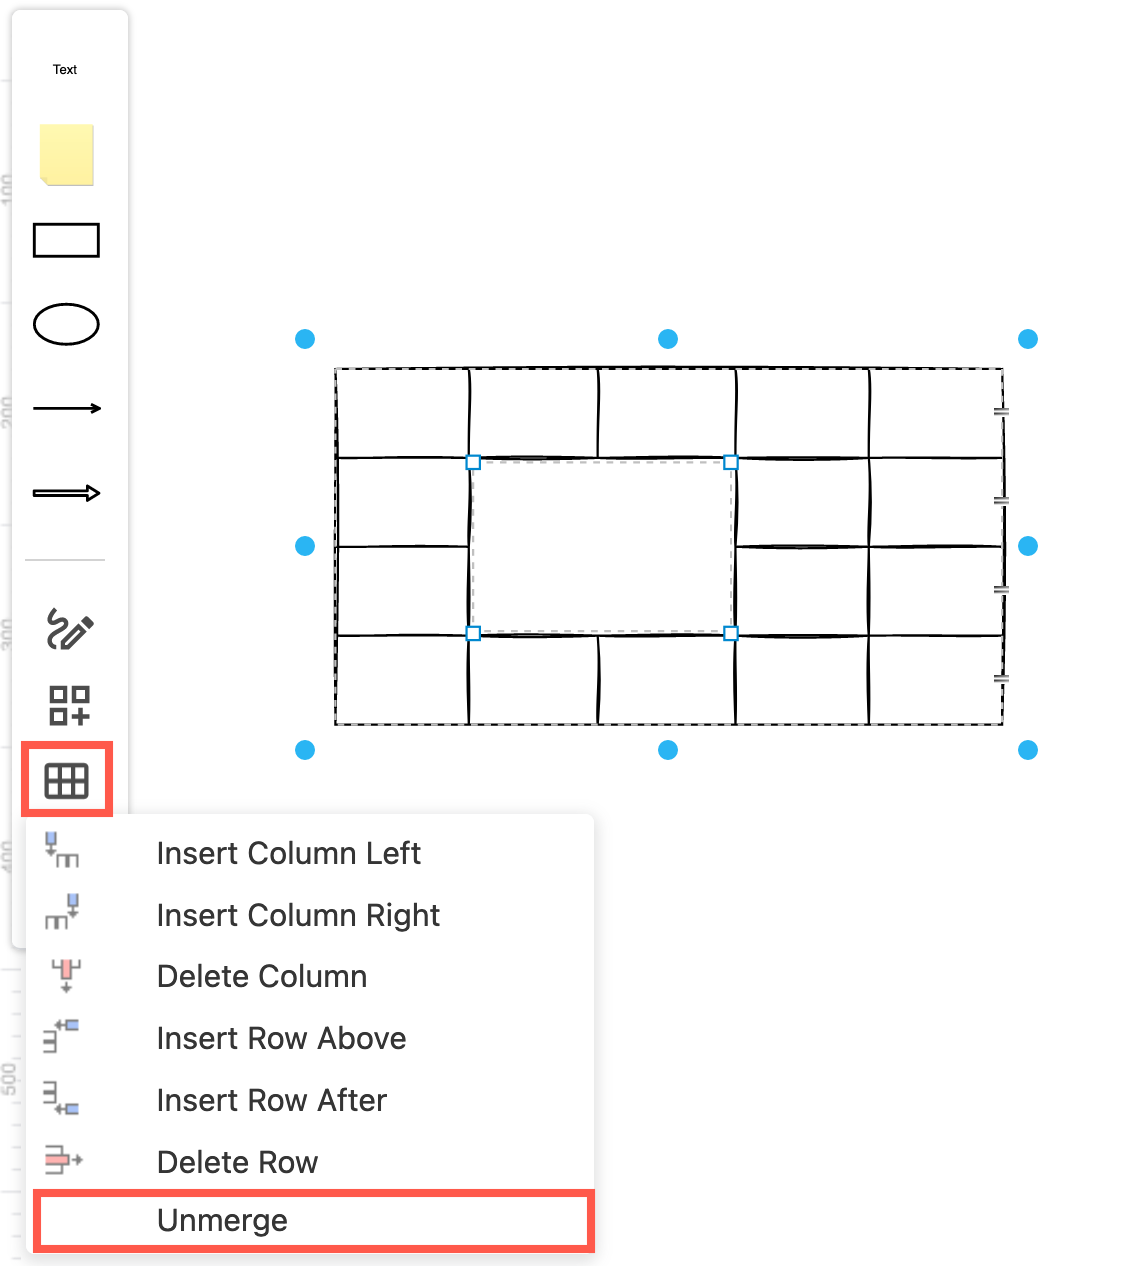 Unmerge table cells in the Sketch whiteboard-like editor theme draw.io